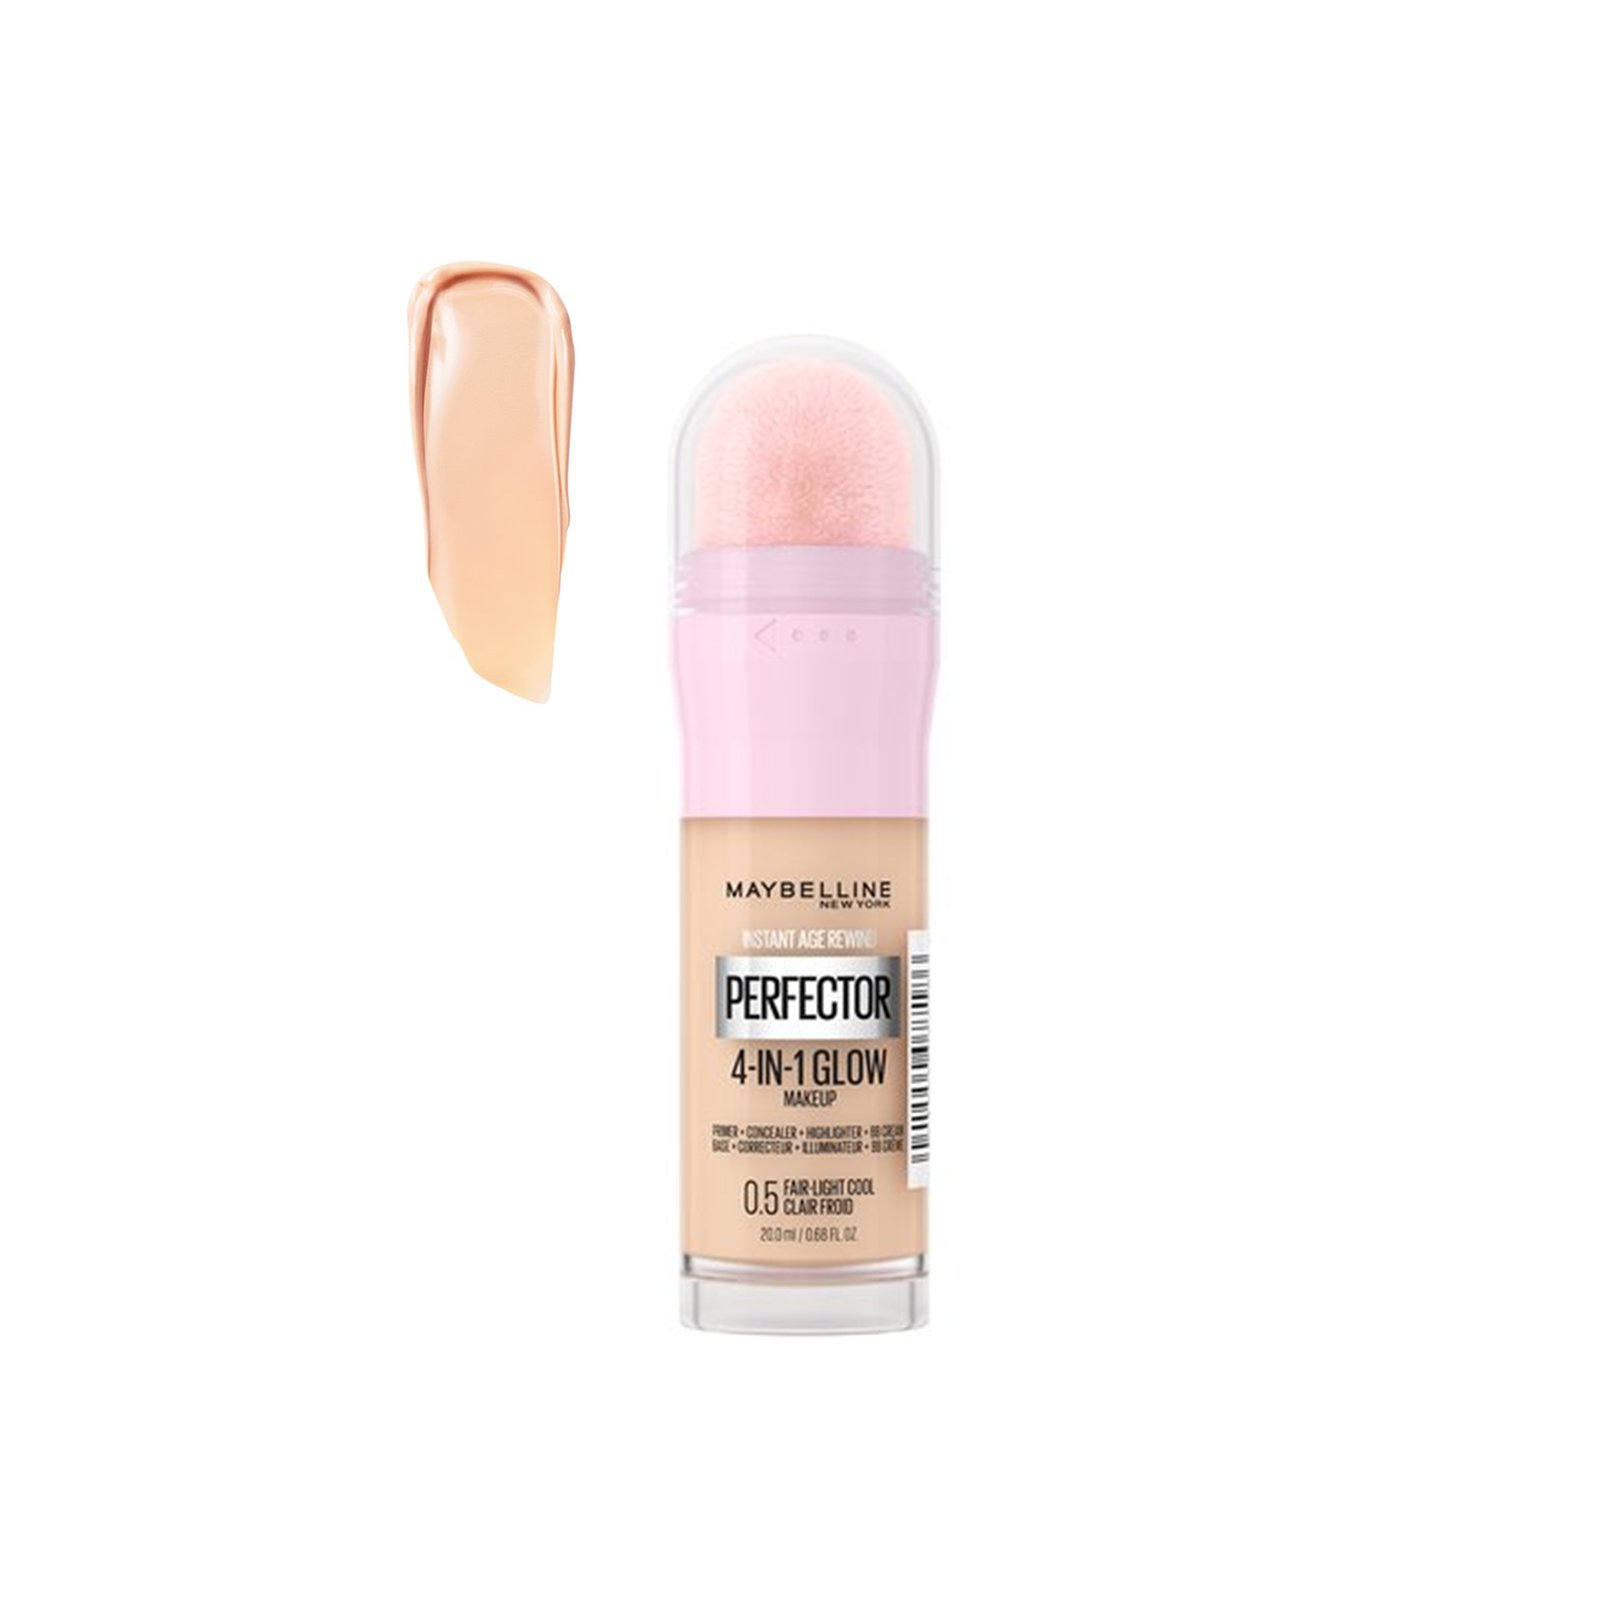 Maybelline Perfector 4-In-1 Glow Makeup 0.5 Fair Light Cool 20ml